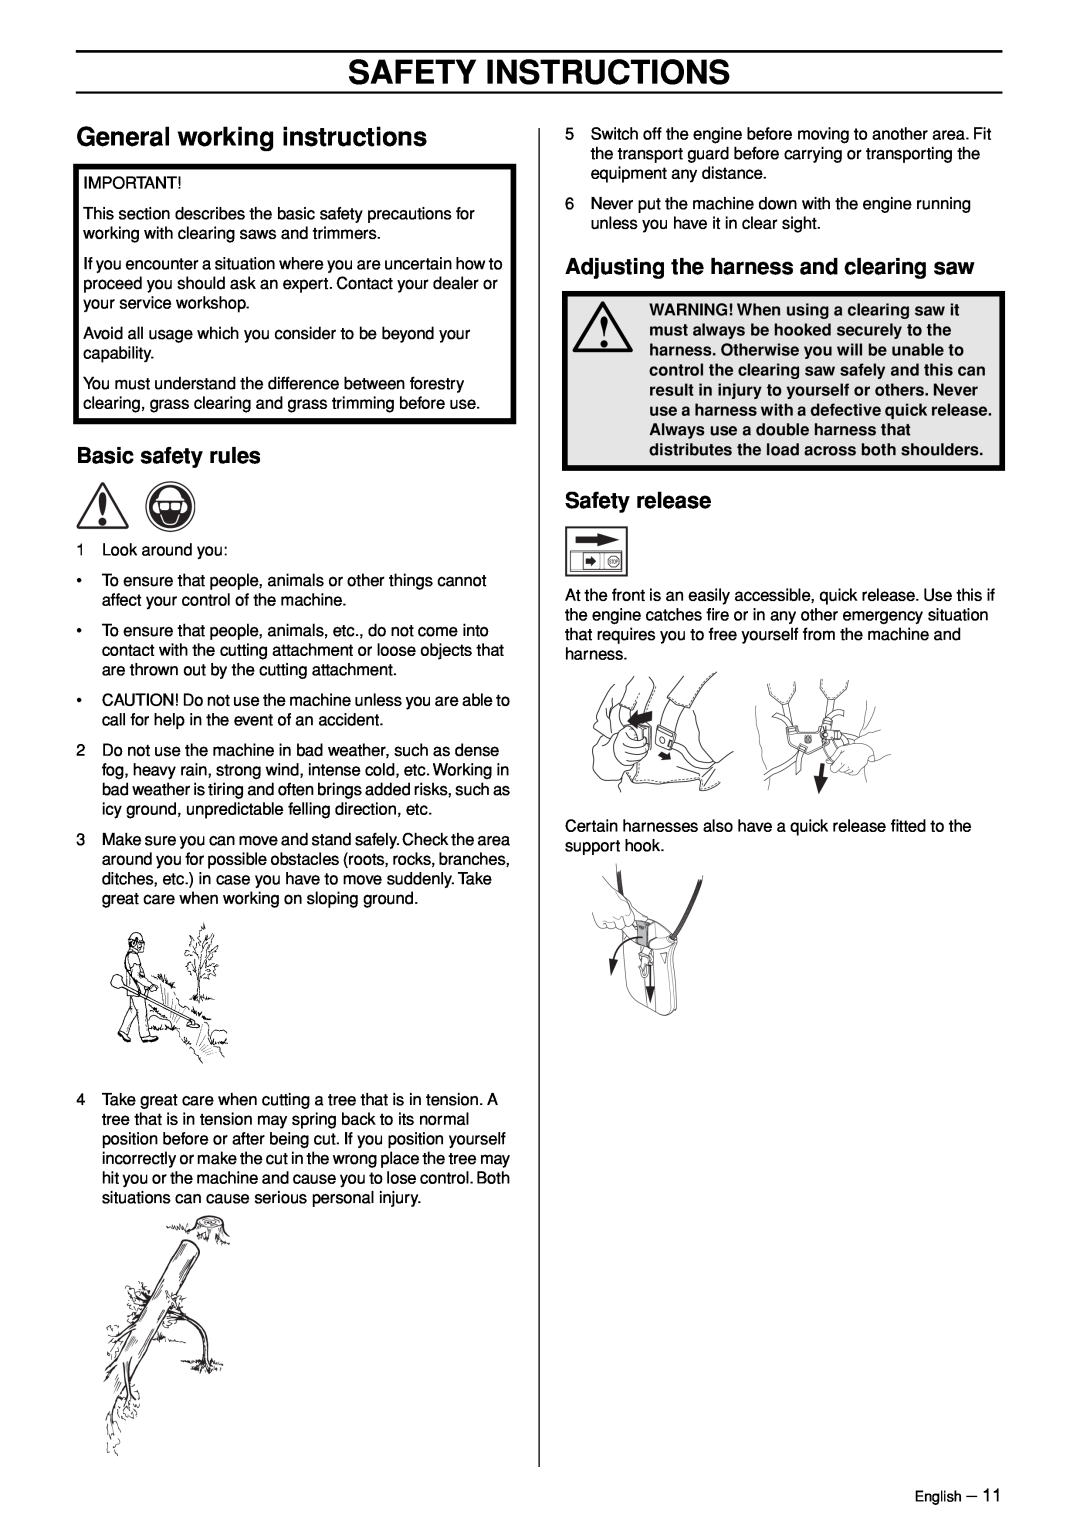 Husqvarna 245R General working instructions, Basic safety rules, Adjusting the harness and clearing saw, Safety release 